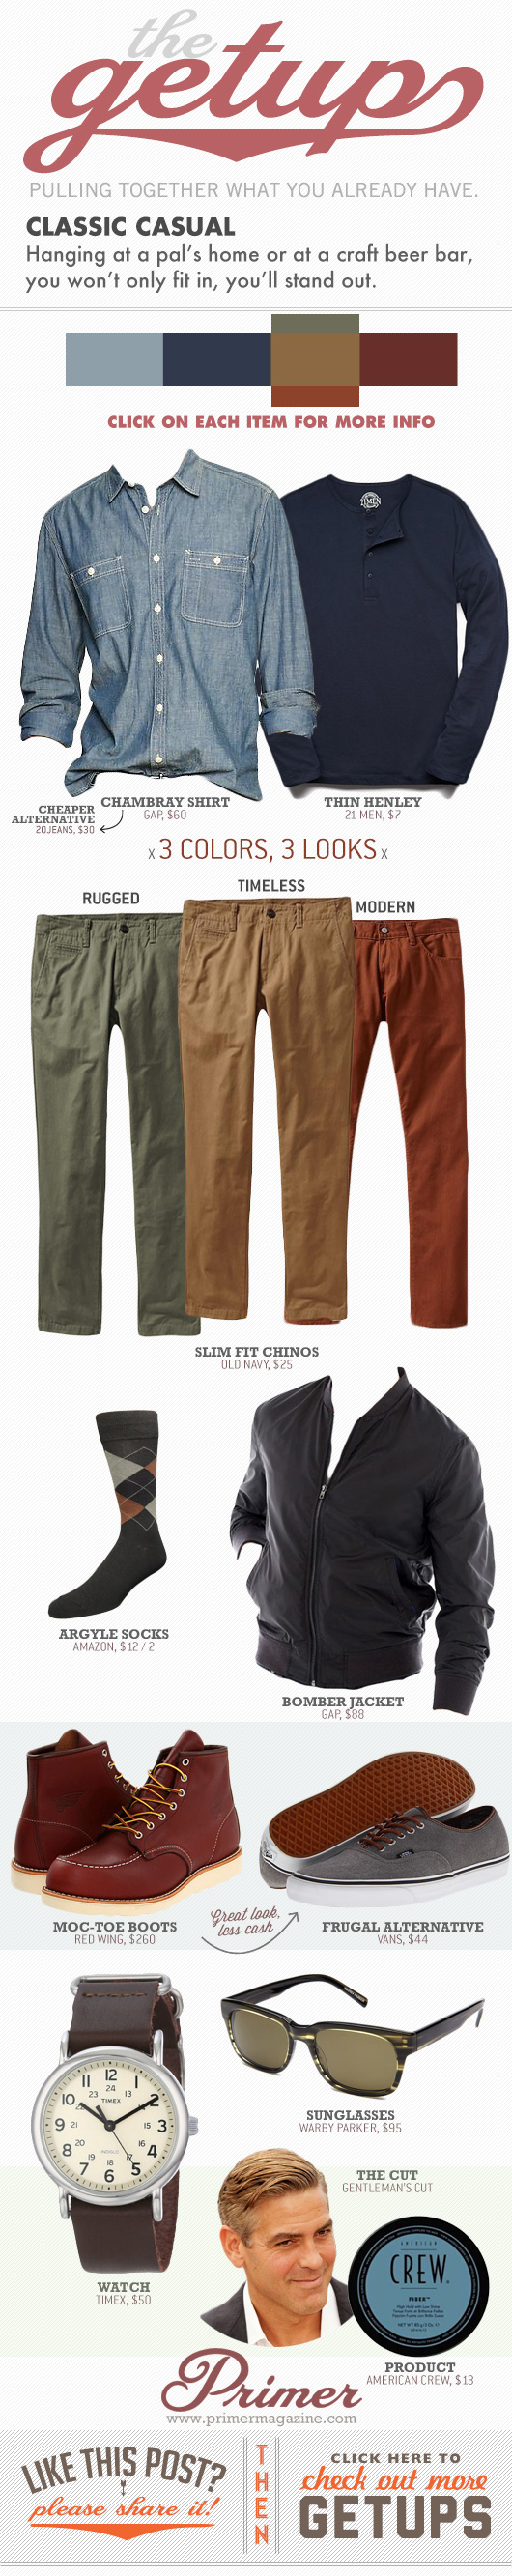 Classic casual Getup - Outfit with 3 colors for pants, green khaki, and orange